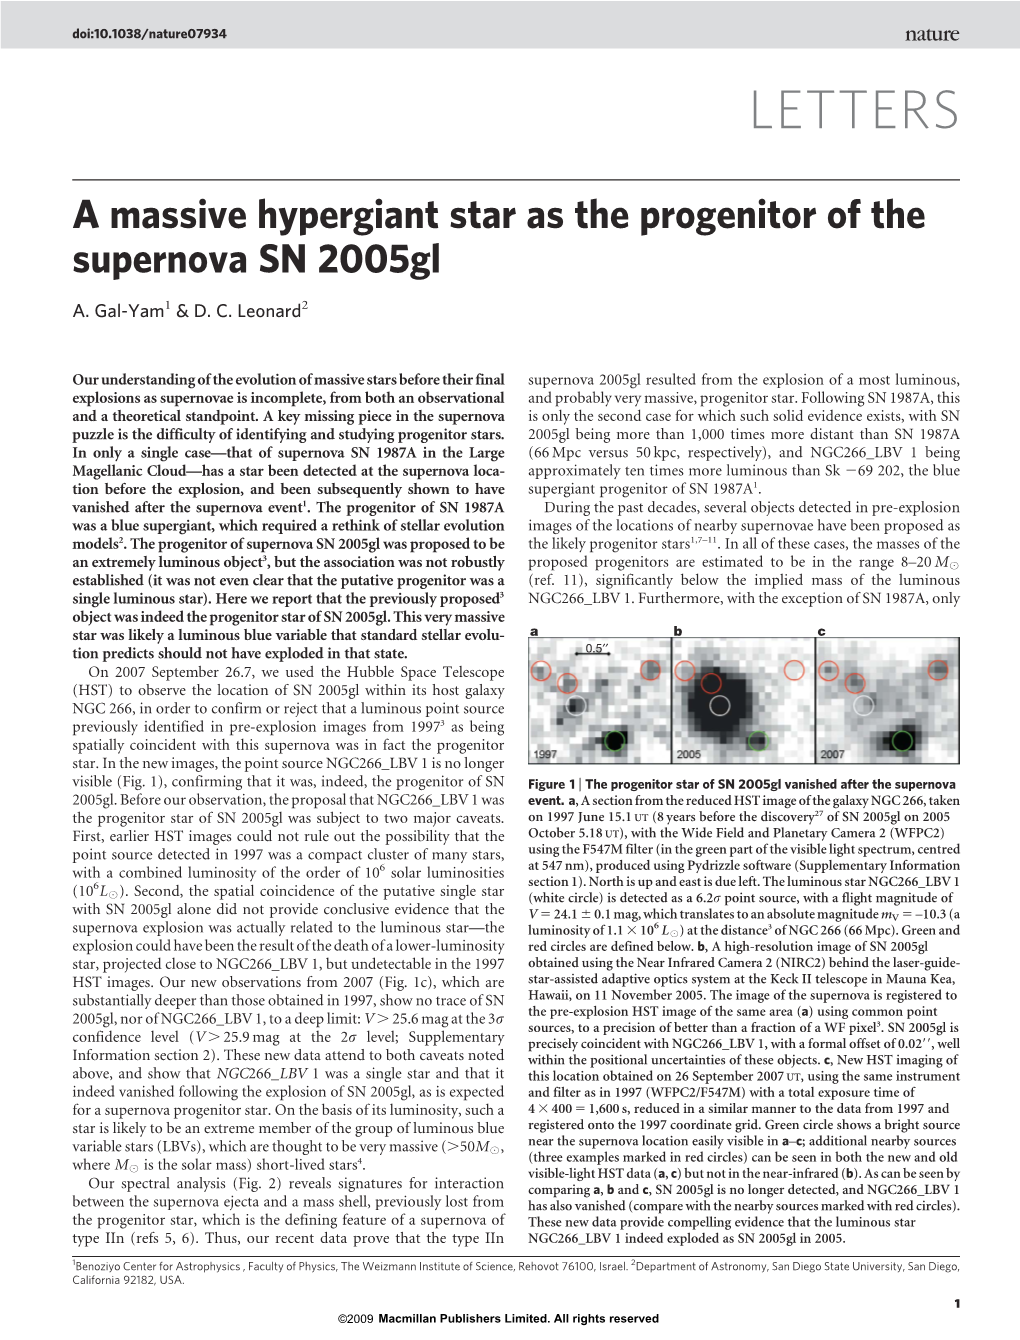 A Massive Hypergiant Star As the Progenitor of the Supernova SN 2005Gl